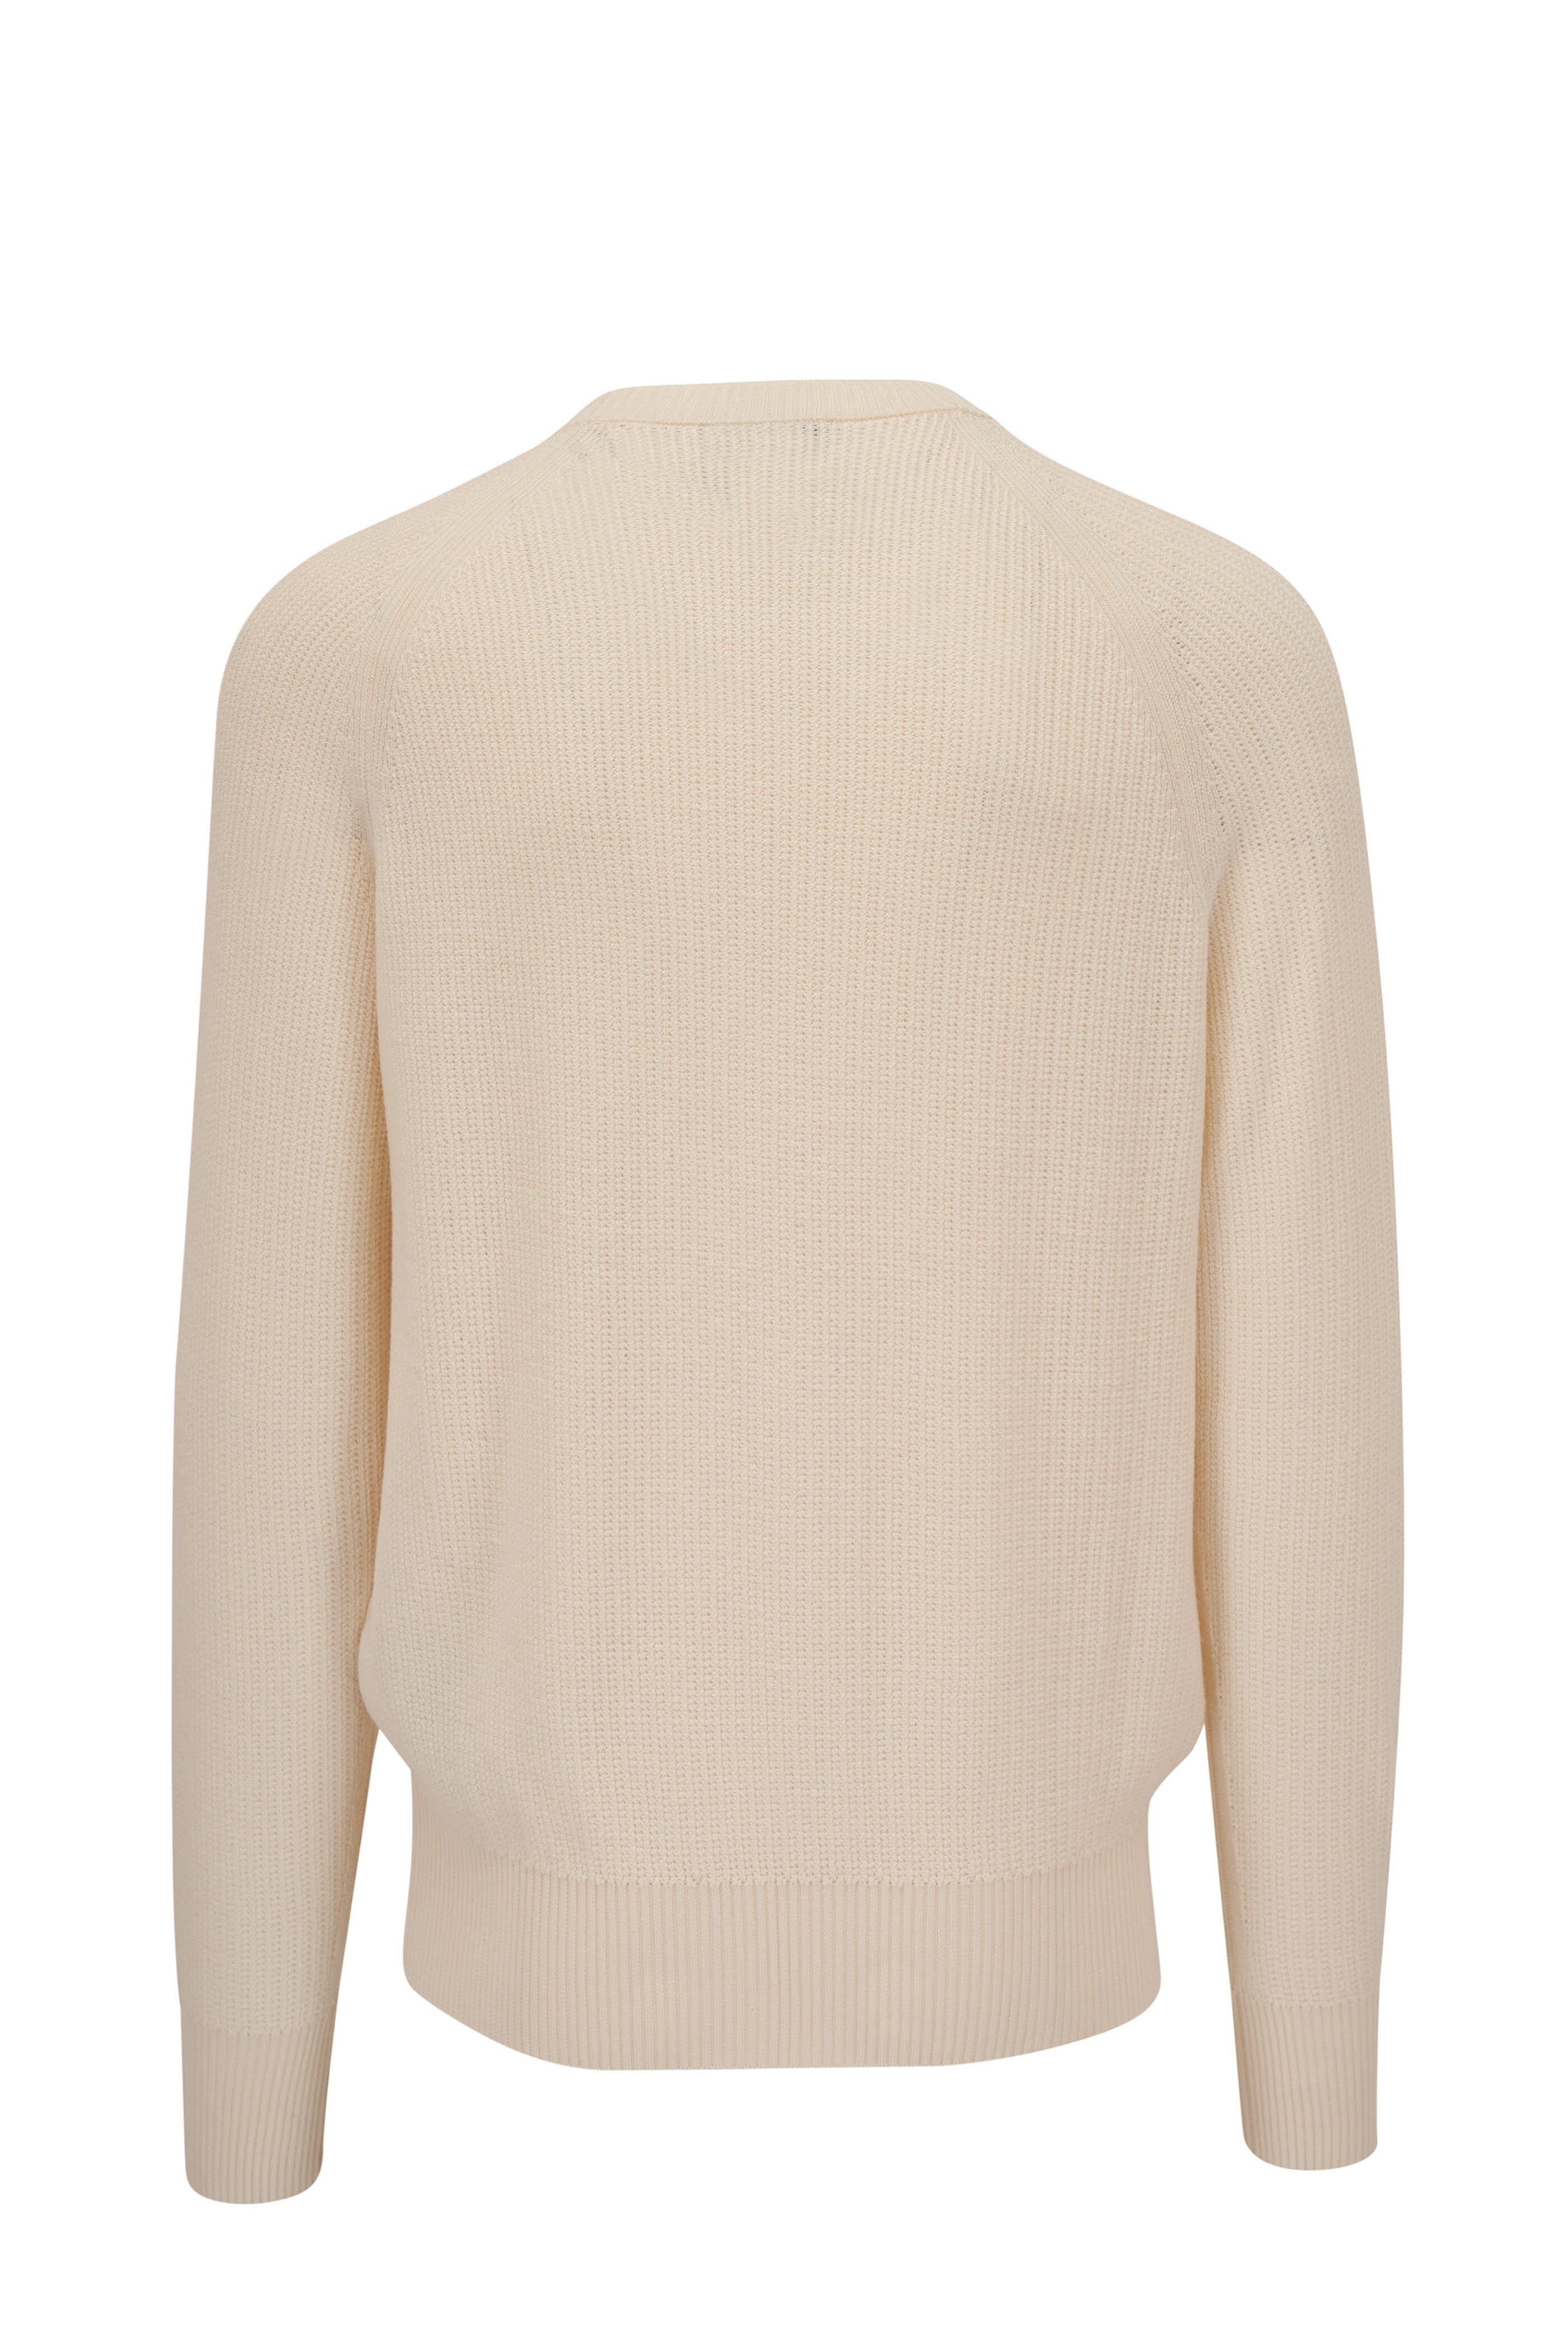 Tom Ford - White Textured Crewneck Sweater | Mitchell Stores